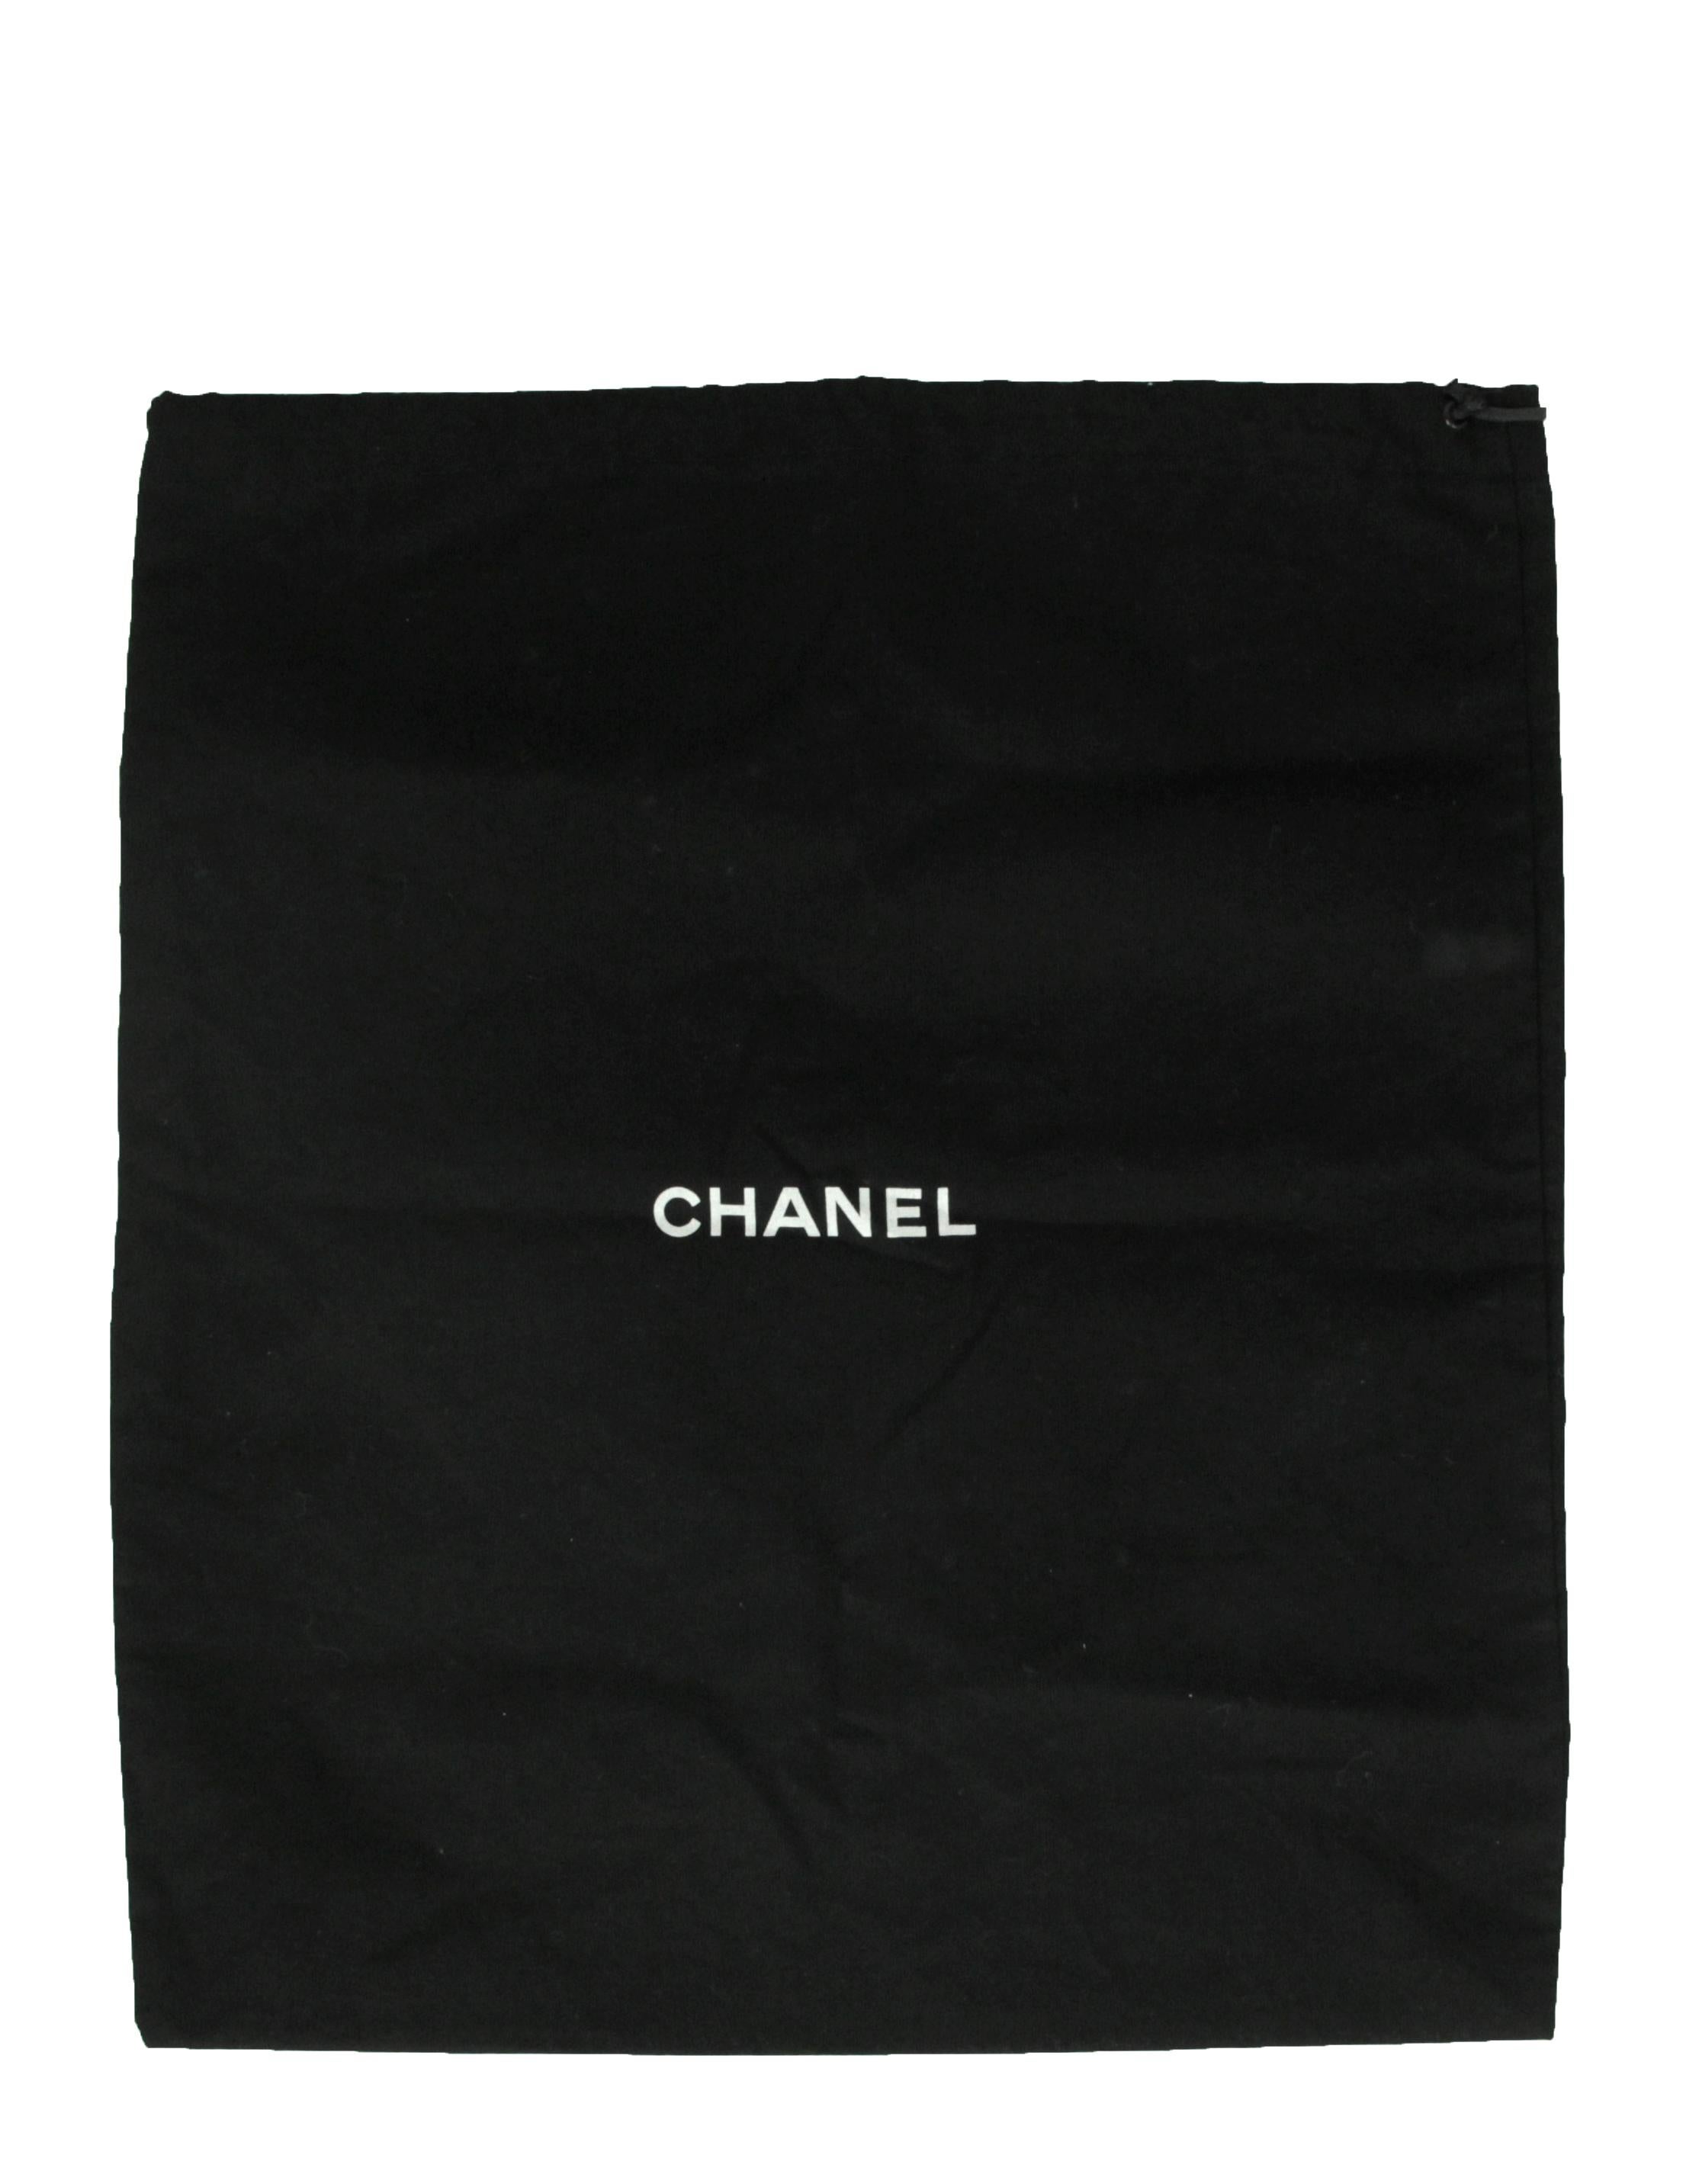 Chanel Black Lambskin Leather Quilted Medium Single Flap Diana Bag

Made In: France
Year of Production: 1994-1996
Color: Black
Hardware: Goldtone
Materials: Lambskin leather, metal
Lining: Burgundy leather 
Closure/Opening: Flap top with cc